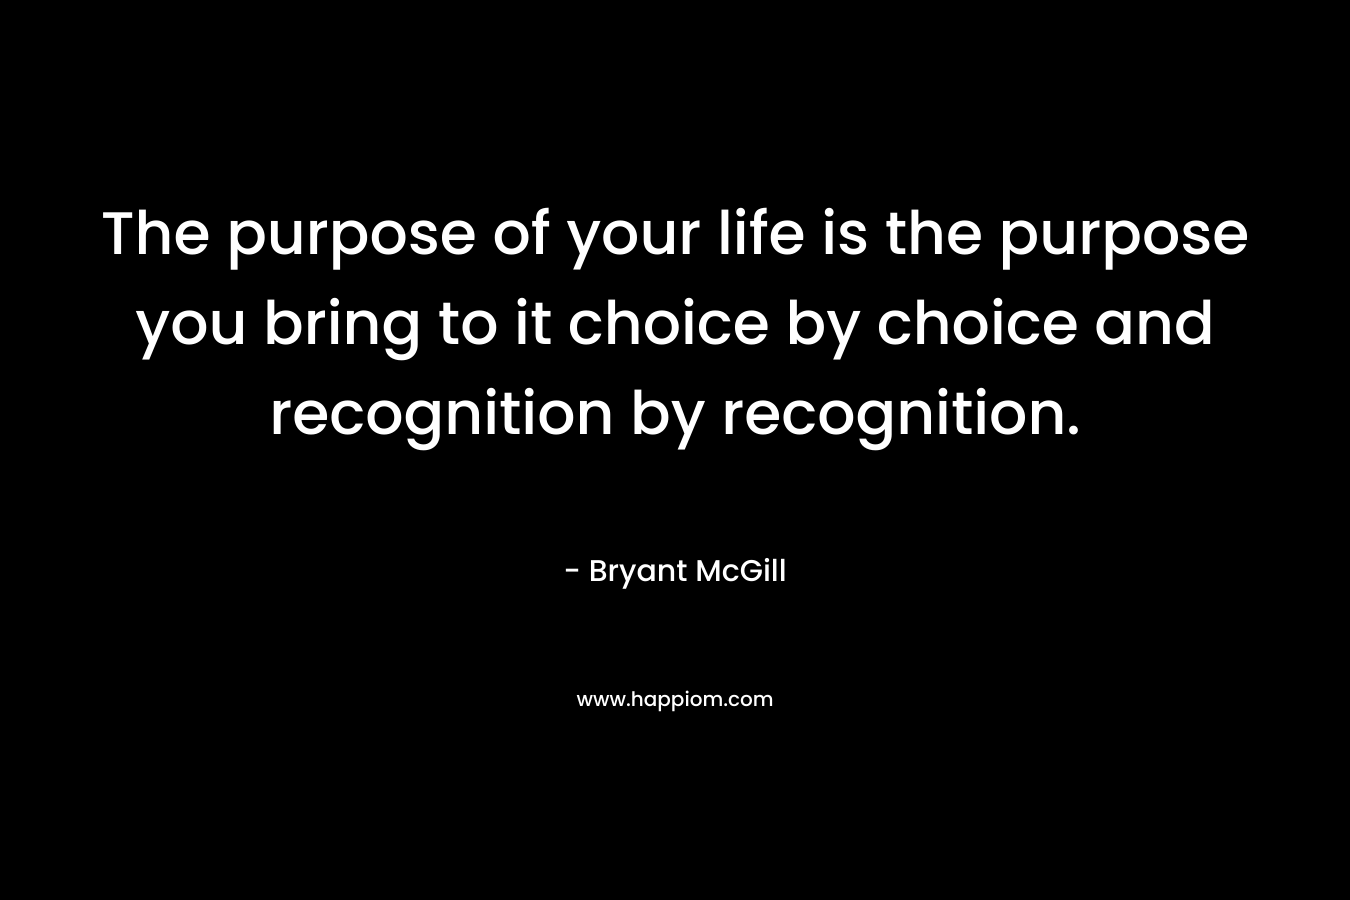 The purpose of your life is the purpose you bring to it choice by choice and recognition by recognition.